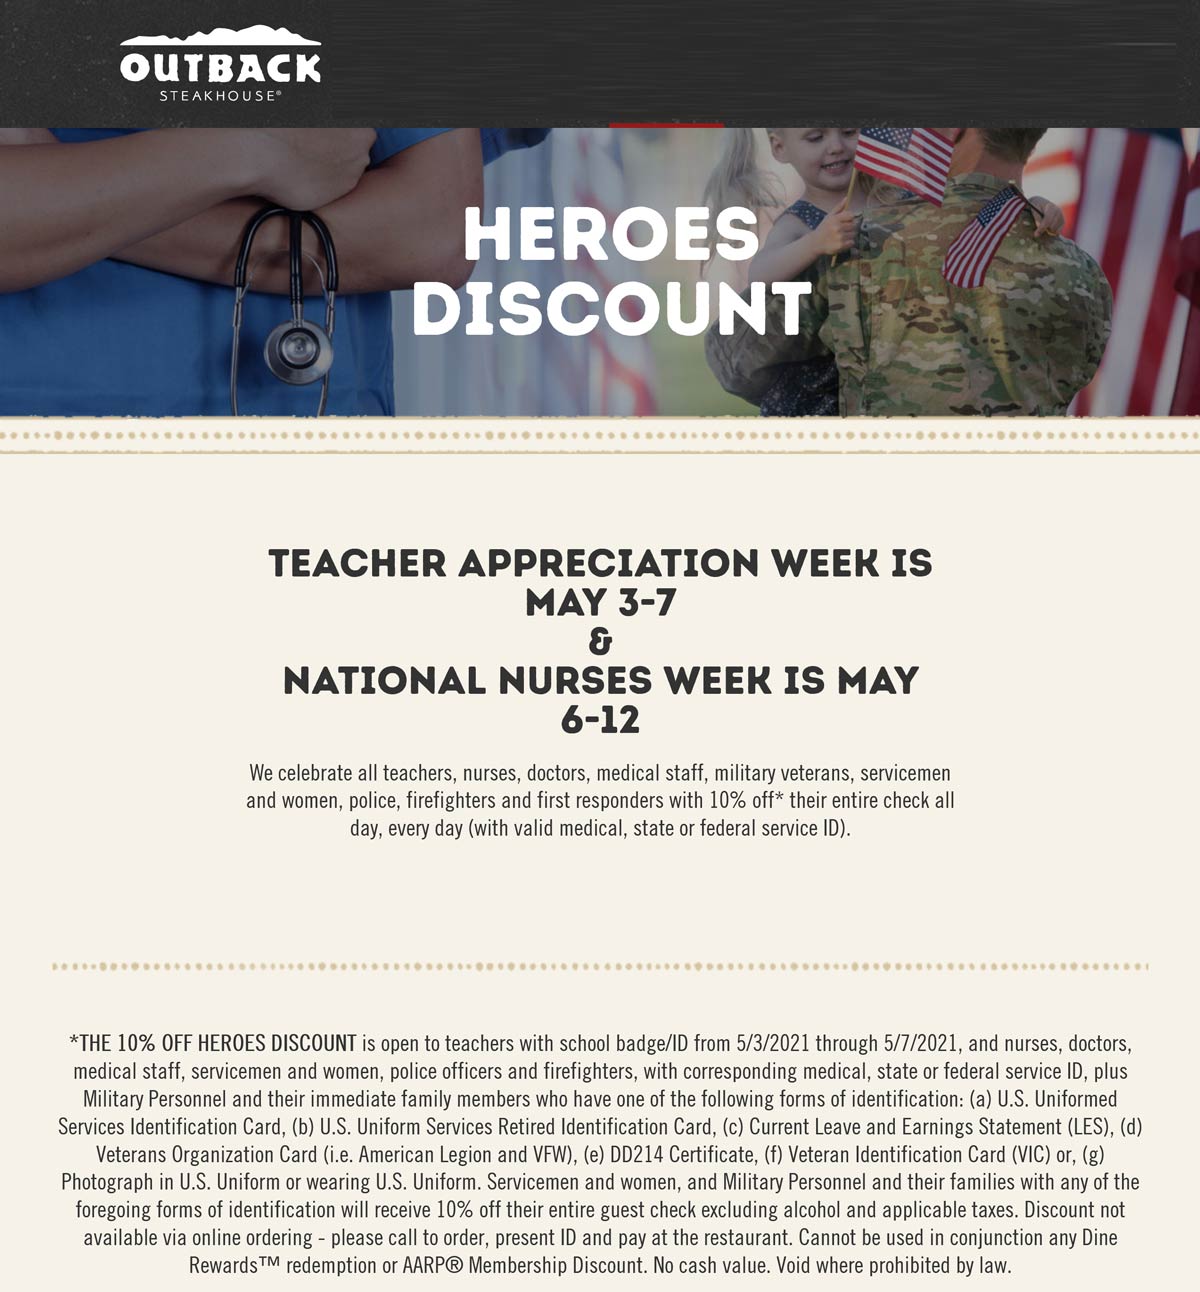 Outback Steakhouse restaurants Coupon  Teachers, military, first responders & medical staff enjoy 10% off at Outback Steakhouse restaurants #outbacksteakhouse 